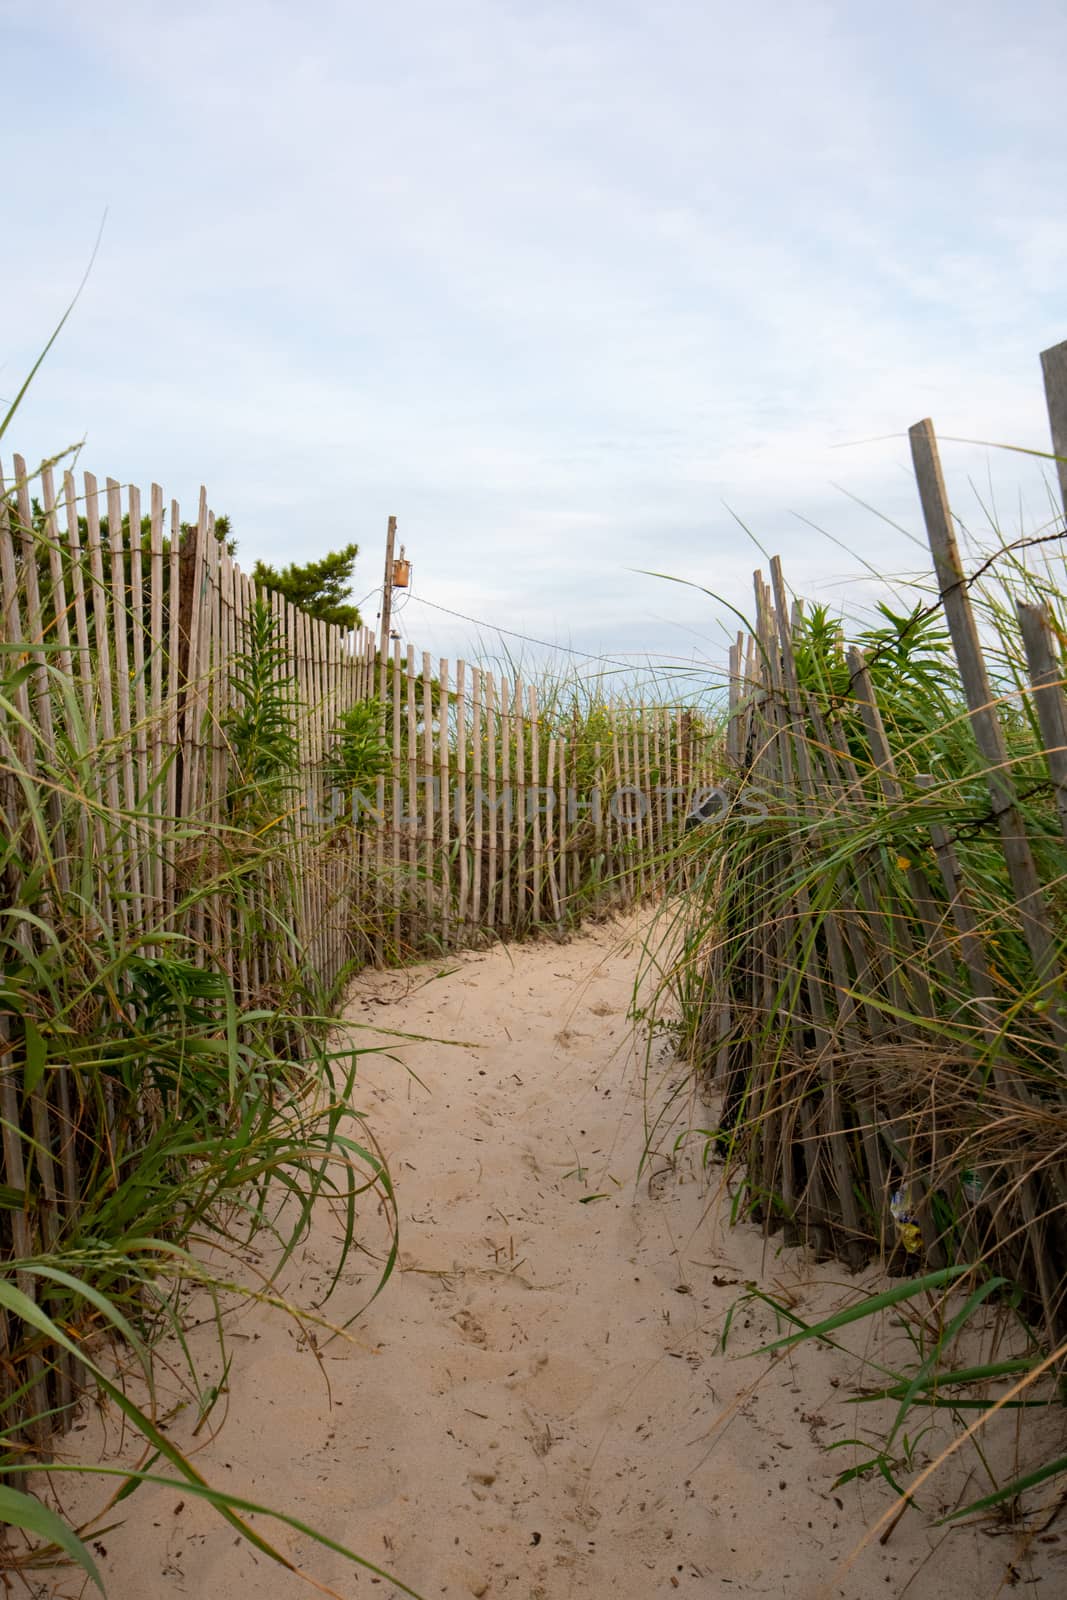 A Sandy Path At the Beach With an Old Wooden Fence and Overgrown Plants on Each Side